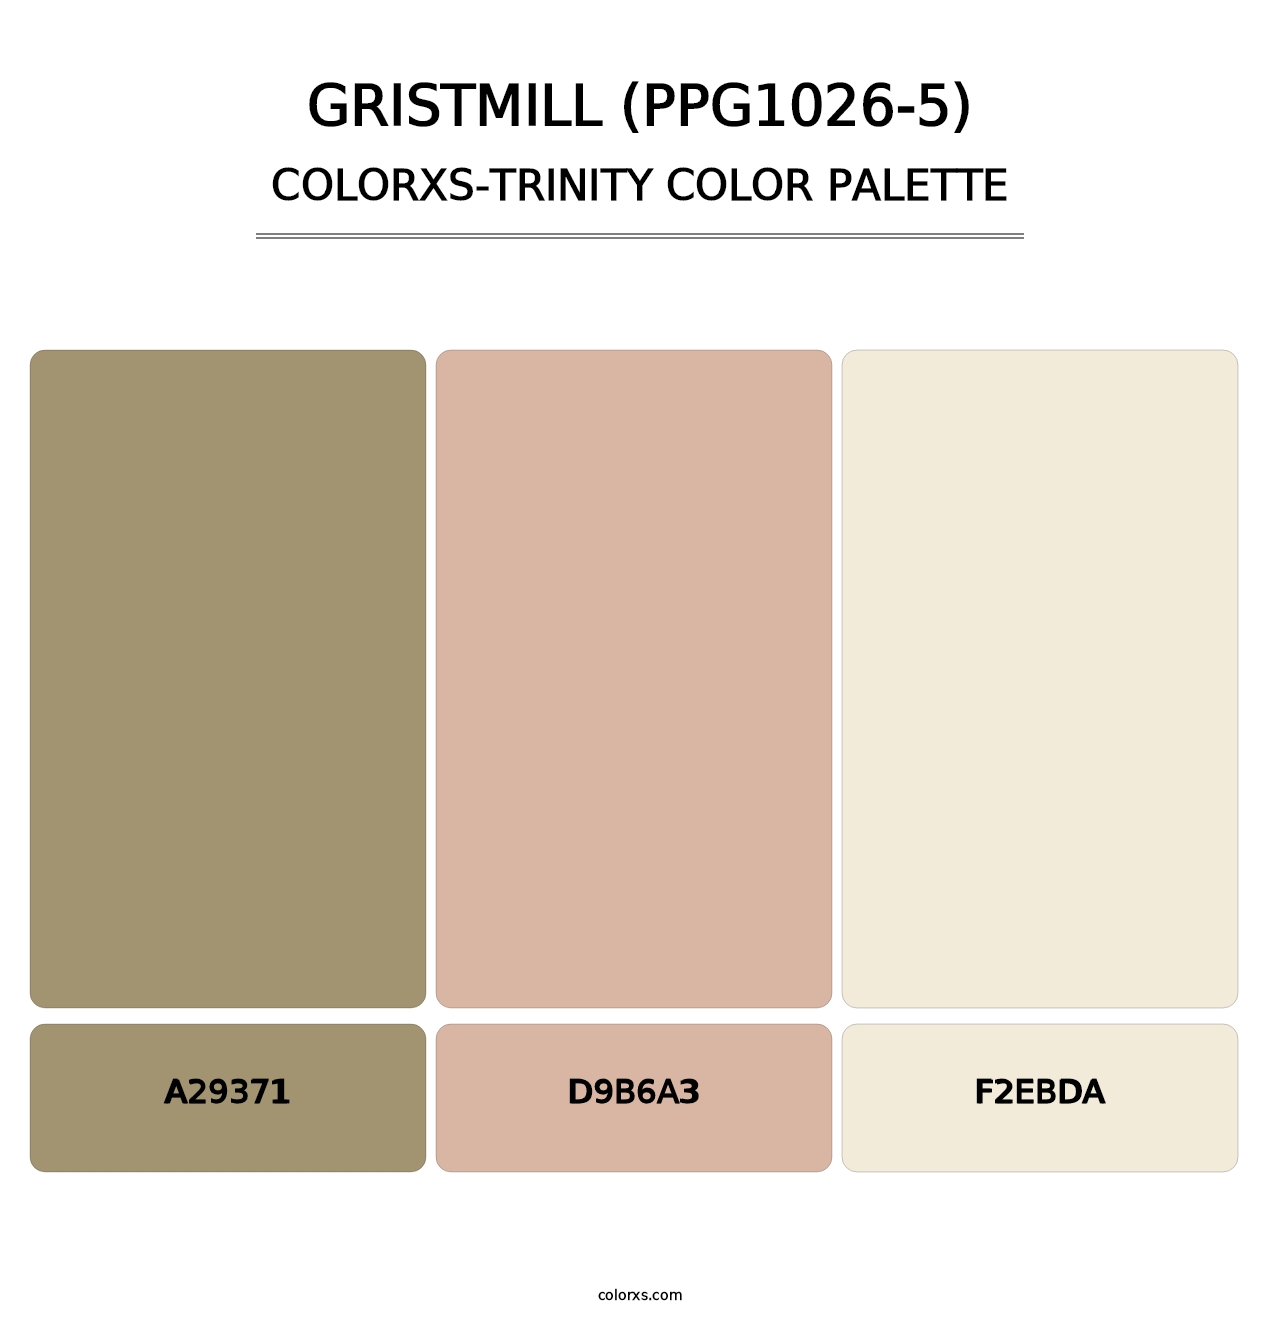 Gristmill (PPG1026-5) - Colorxs Trinity Palette